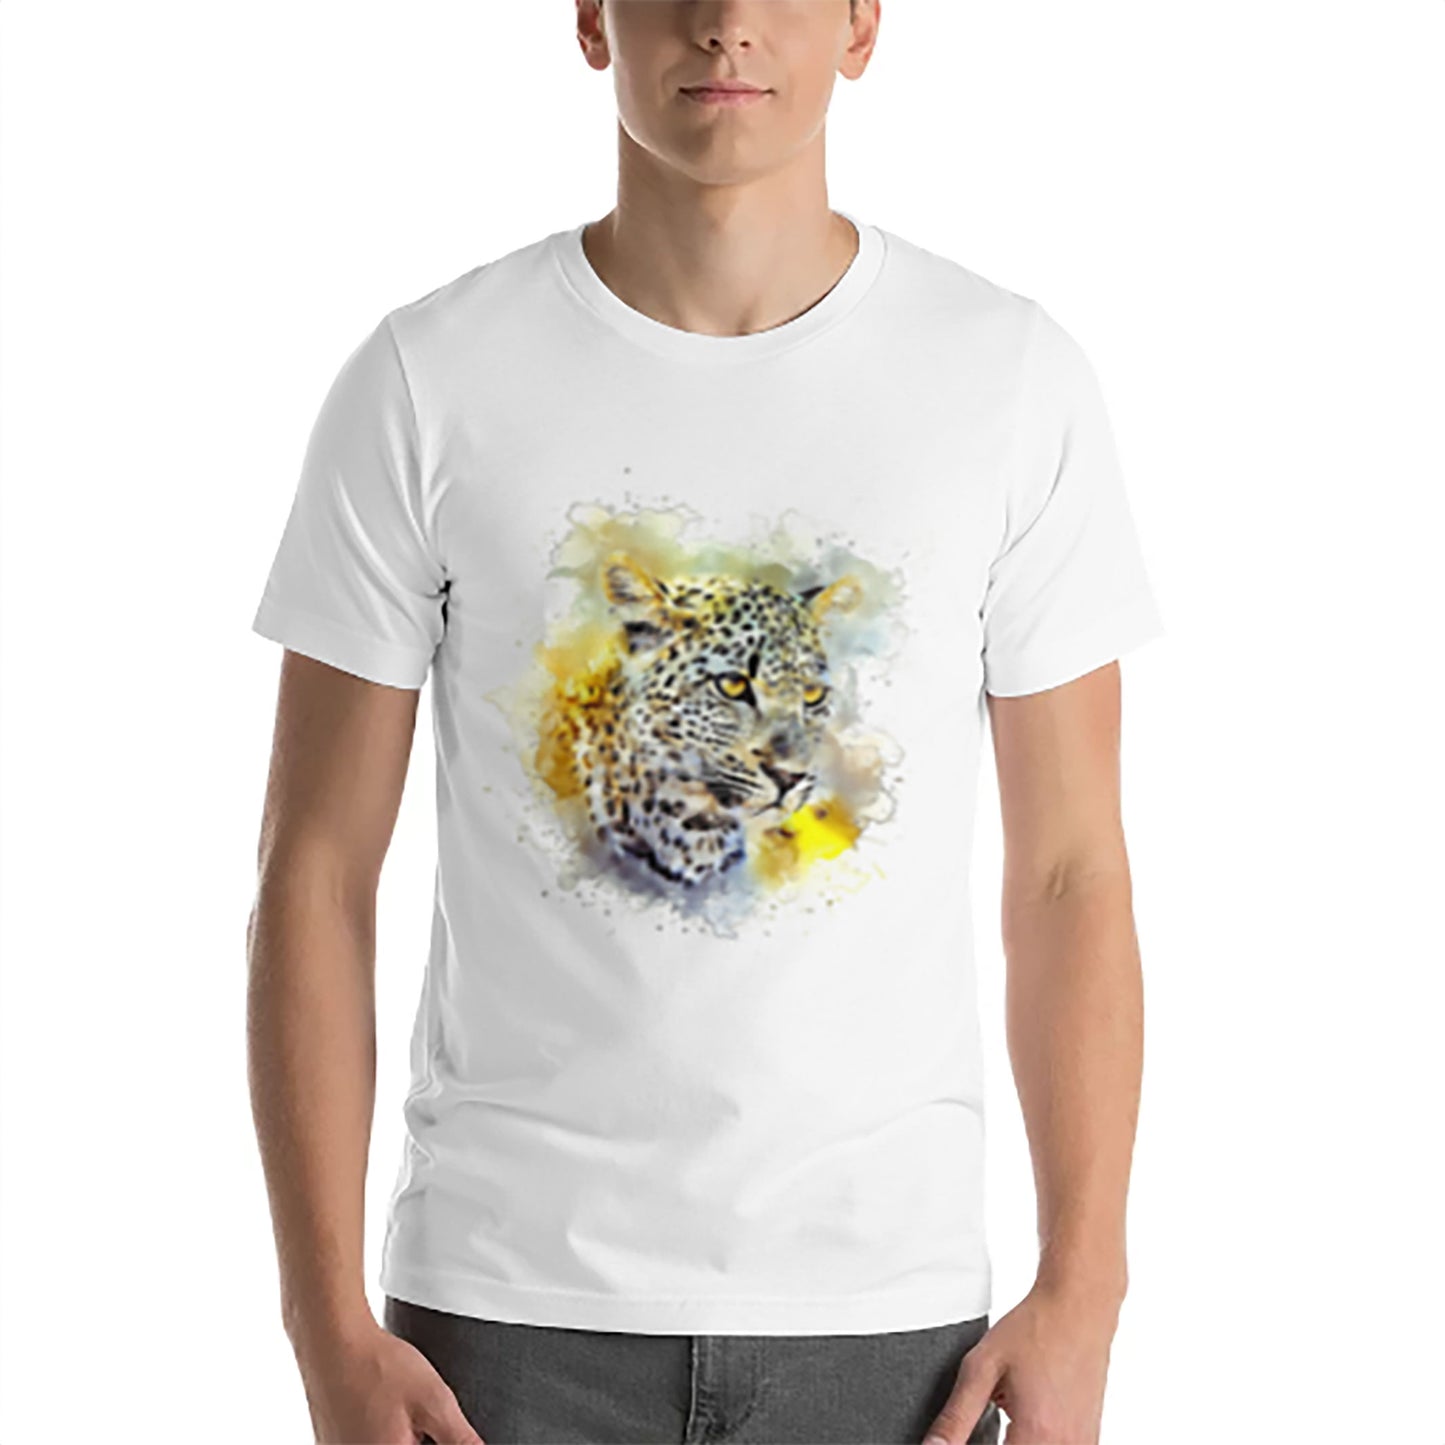 Women and Men's (Unisex) T-Shirt Printed with a Leopard